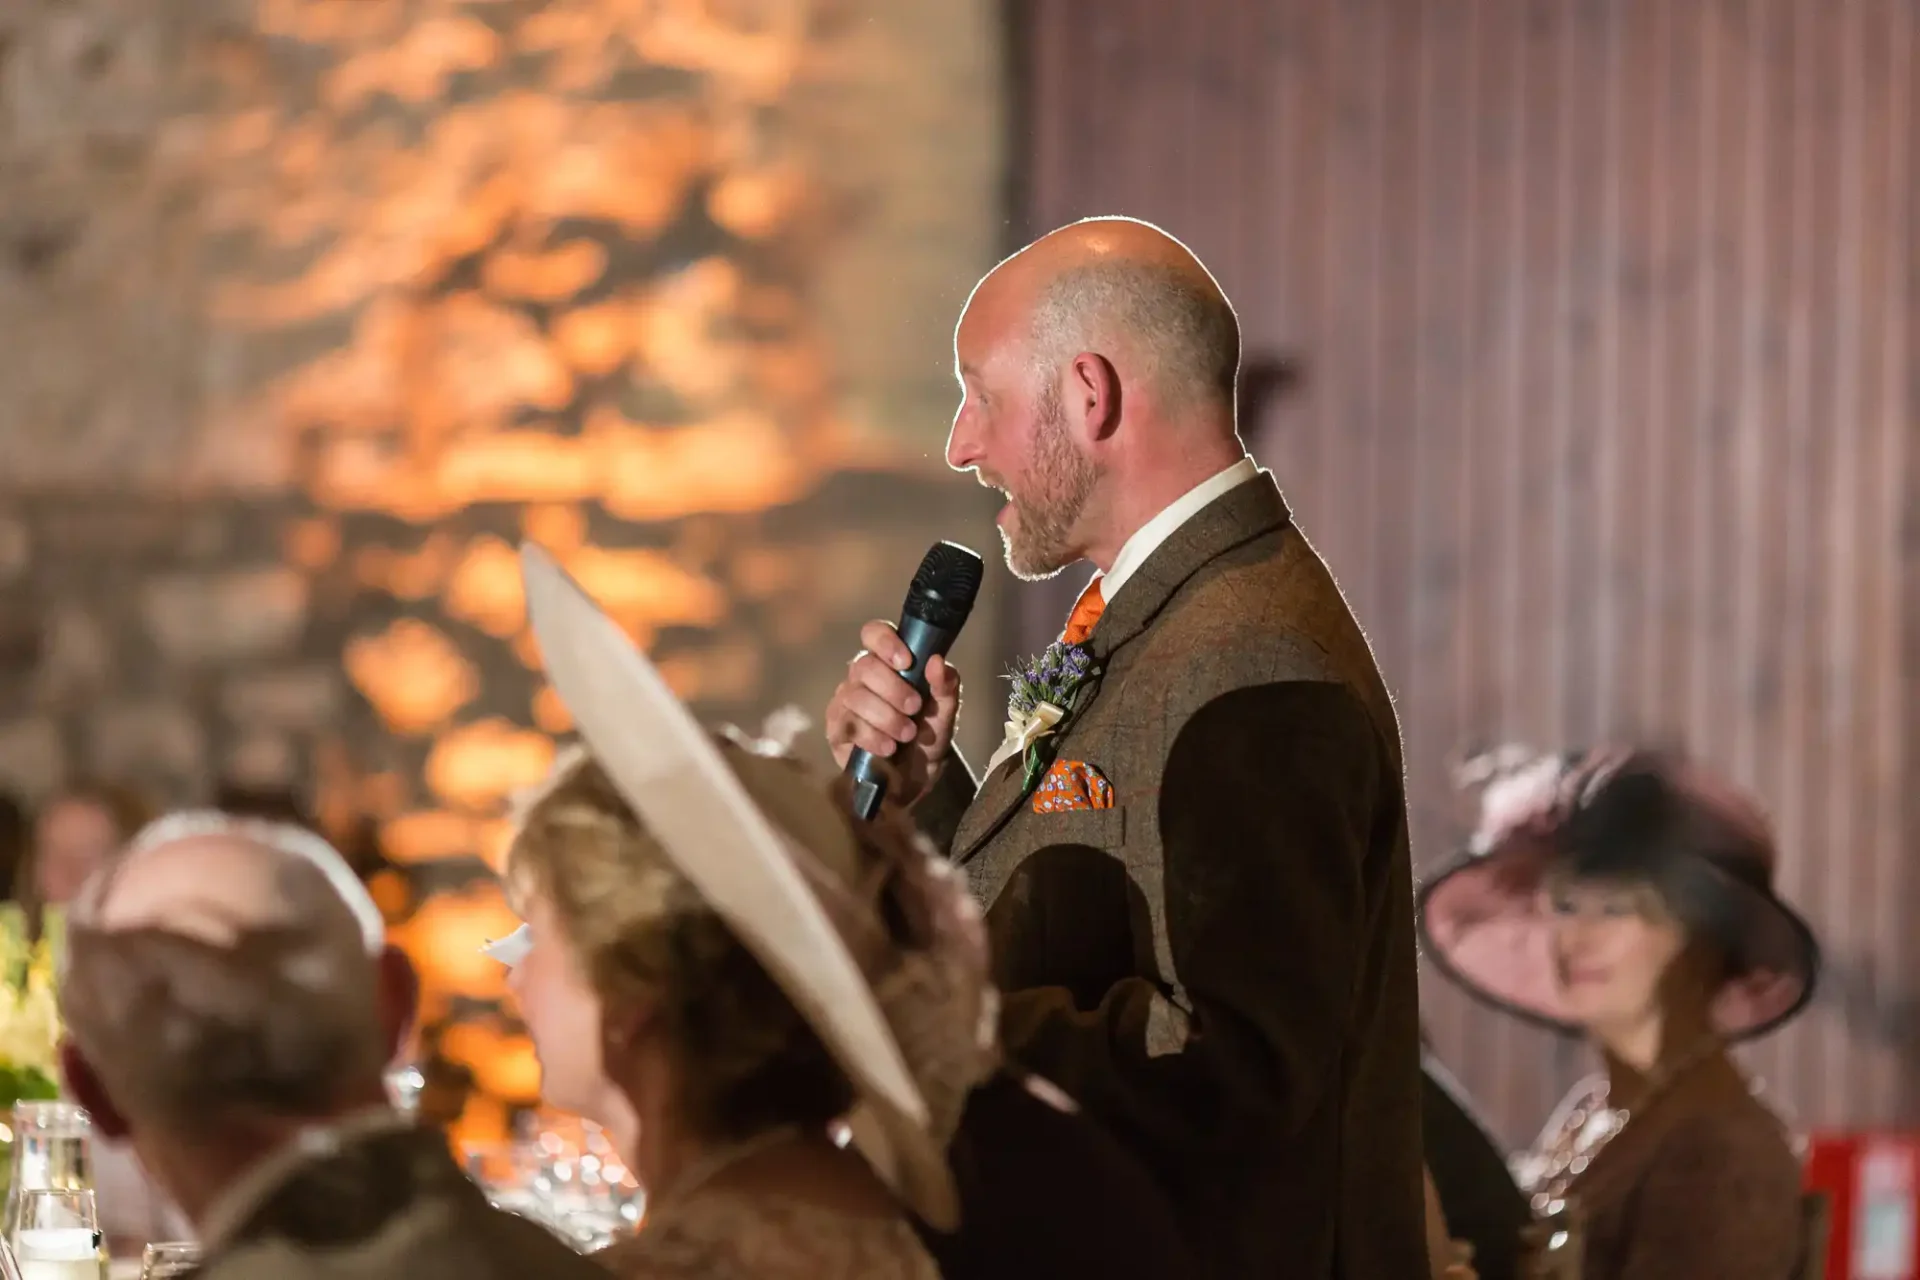 Bald man in a tweed suit giving a speech at a wedding, holding a microphone and a paper, with guests in fancy hats blurred in the background.